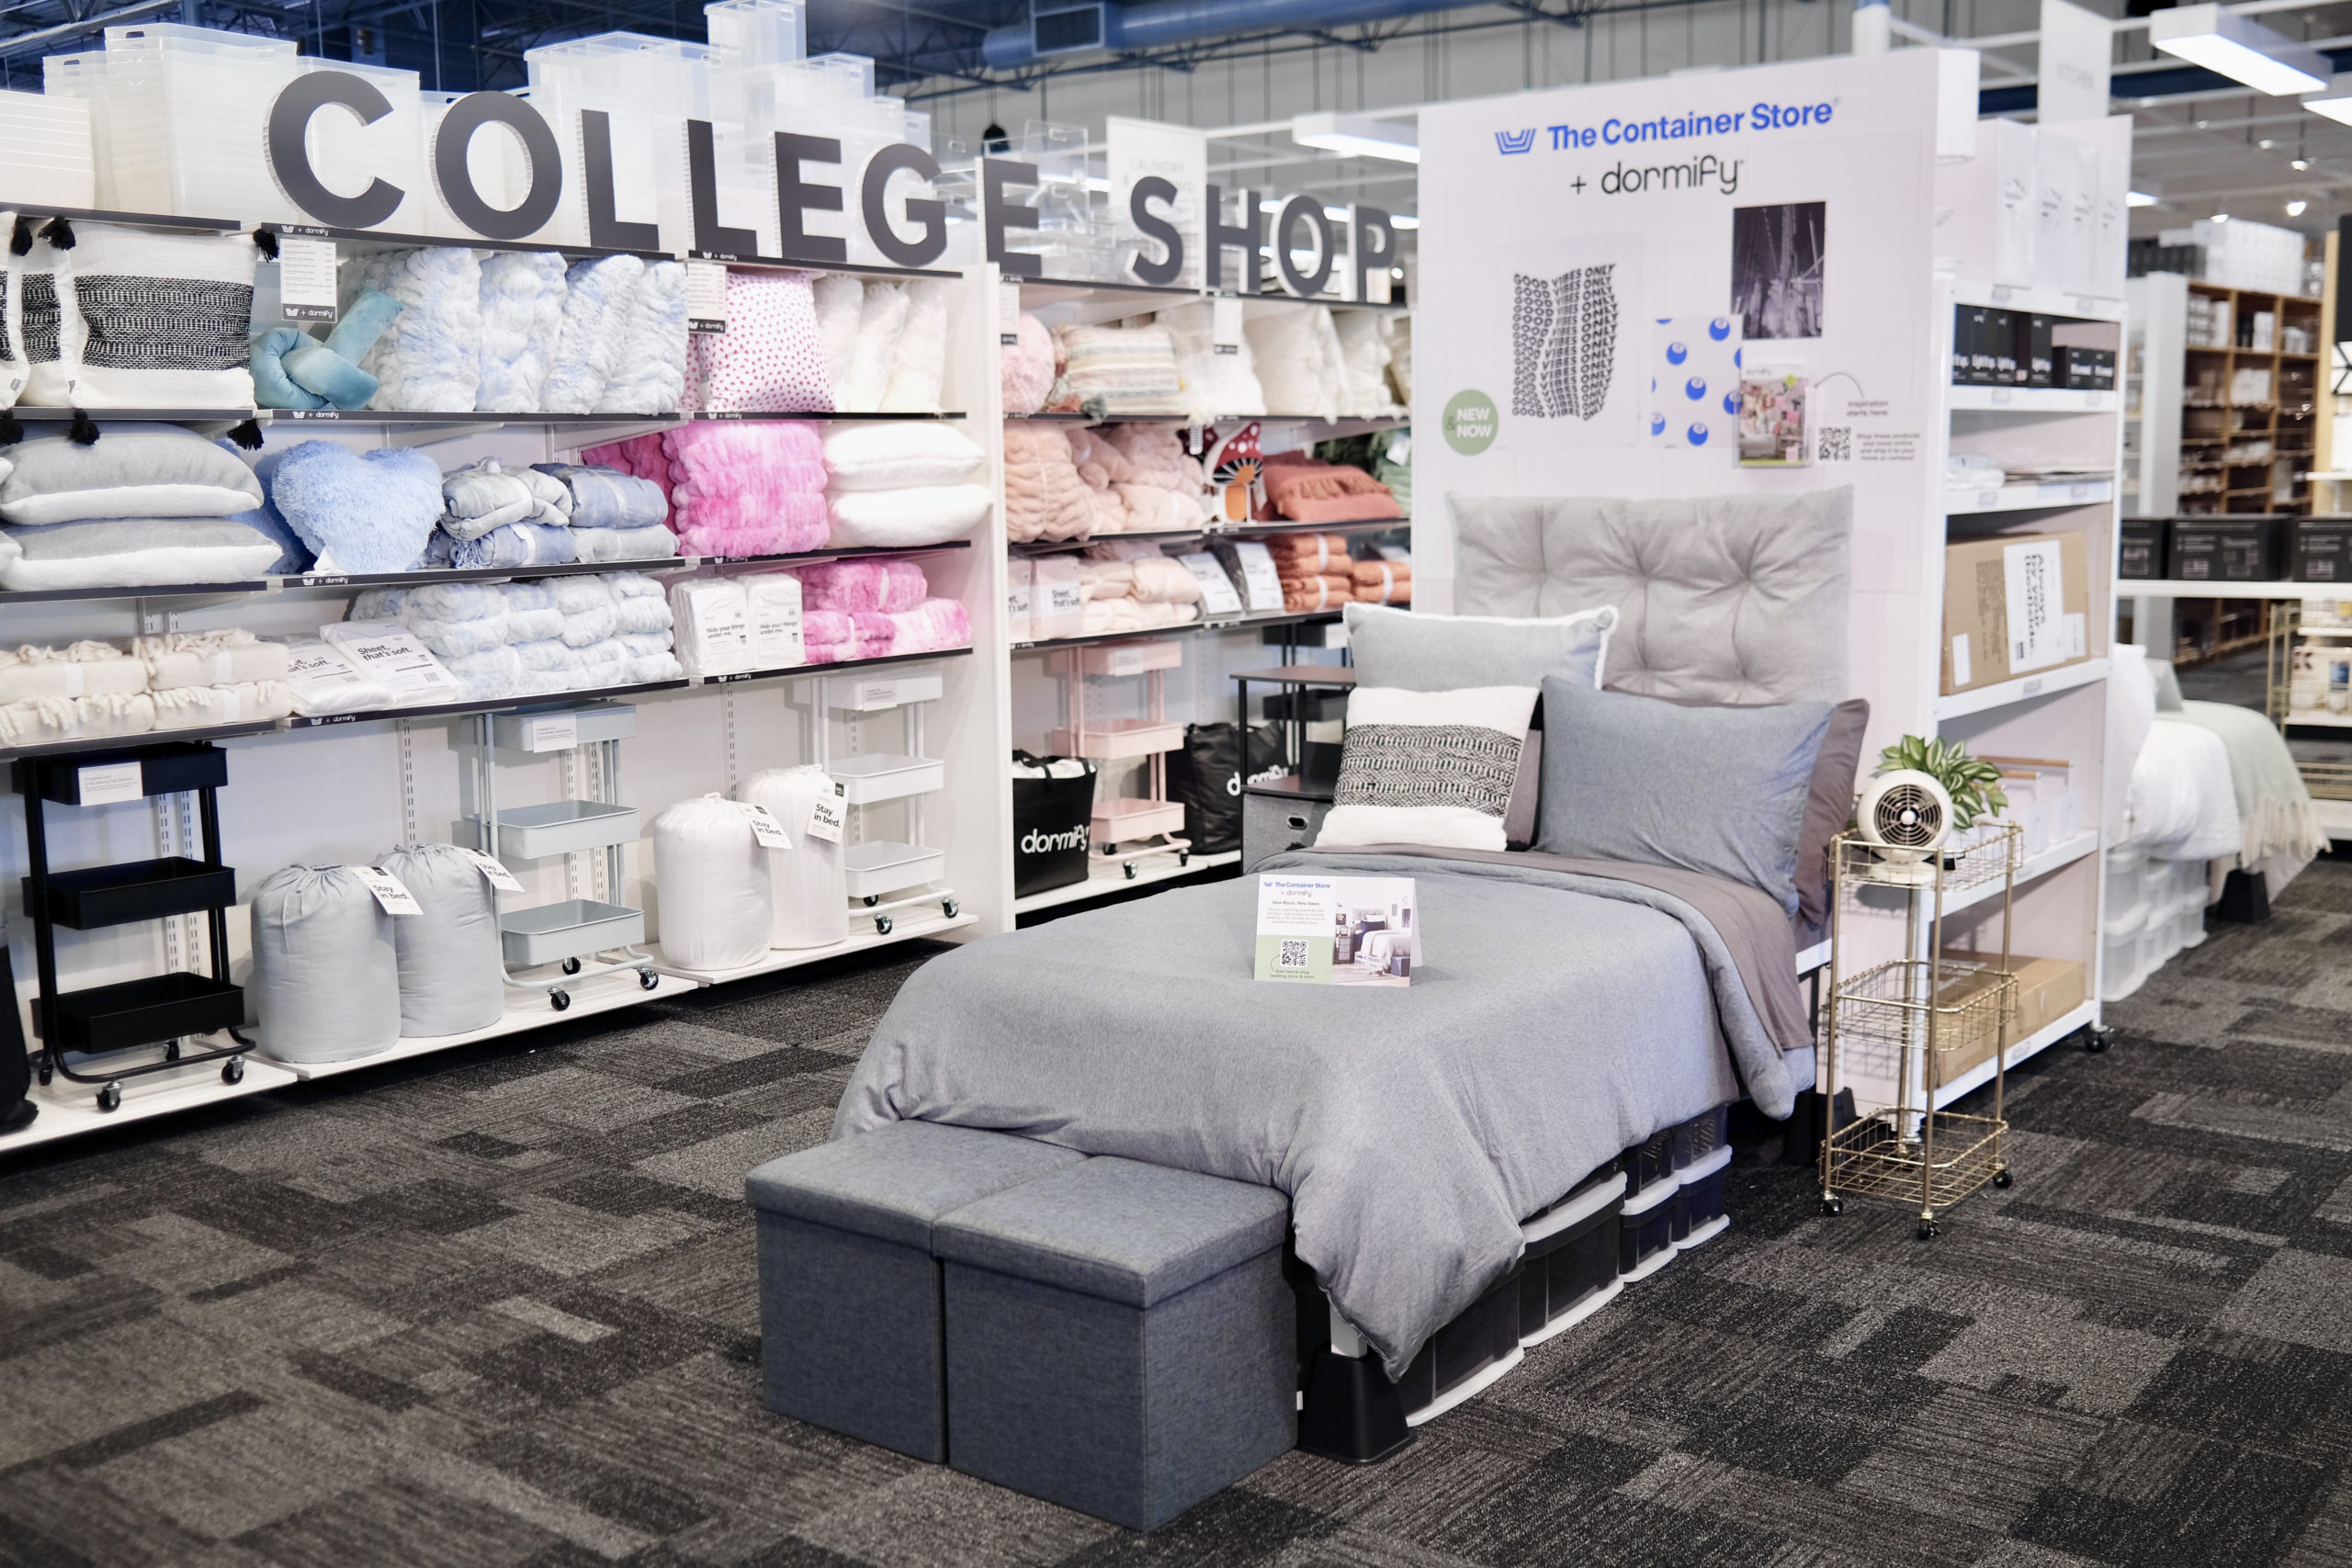 The Container Store Teams with Dormify